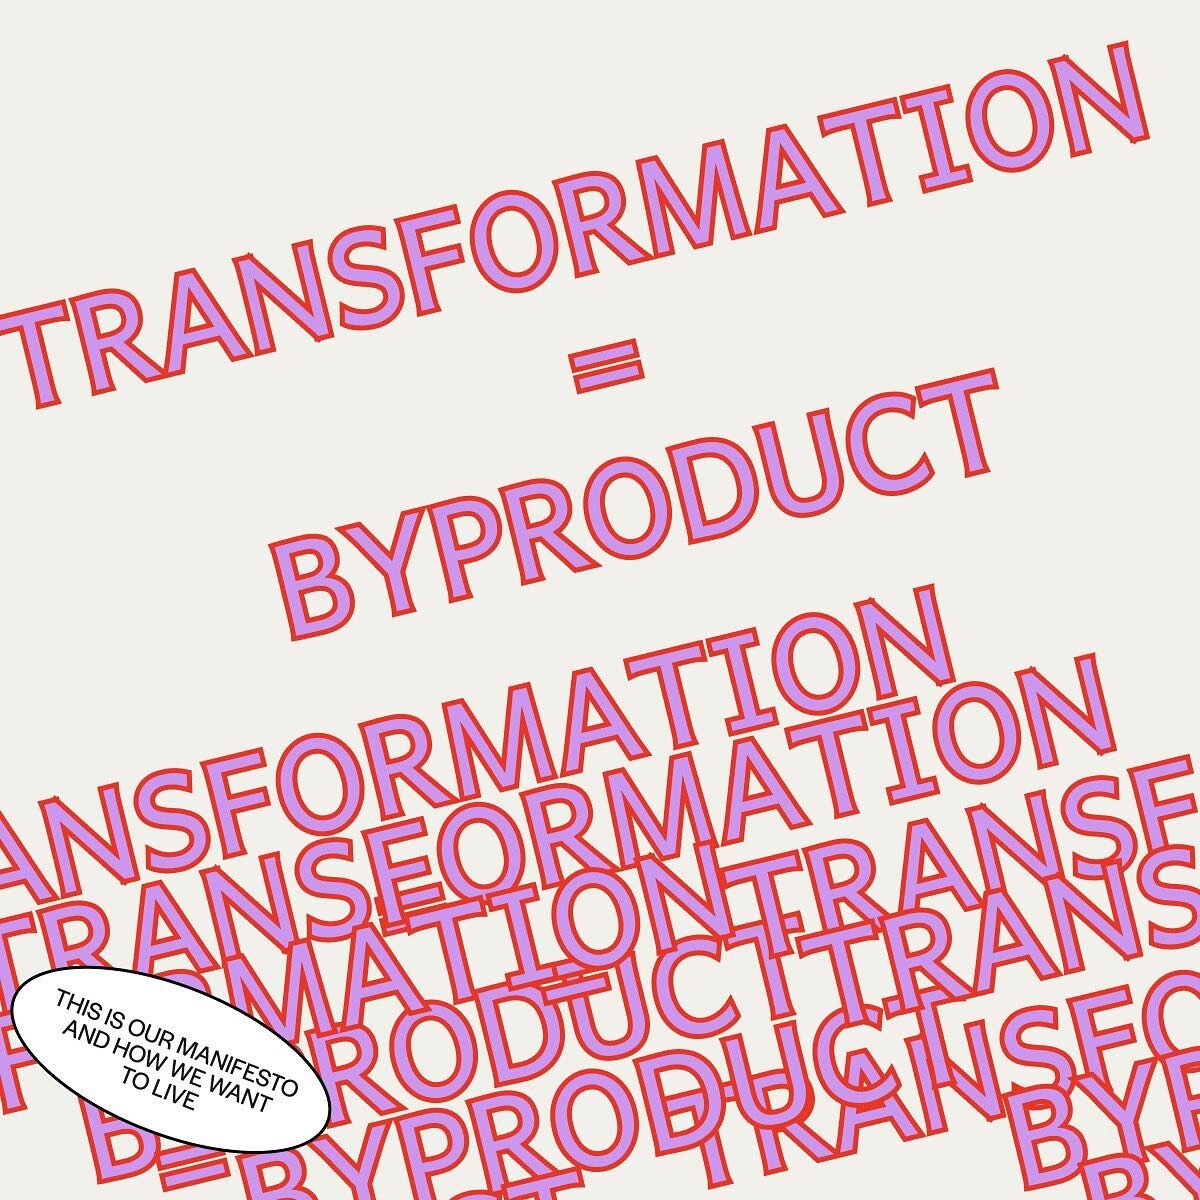 &ldquo;Transformation is our Byproduct&rdquo;
When we take Steps toward Christ we can&rsquo;t help but be transformed into his image! #ownyourgrowth